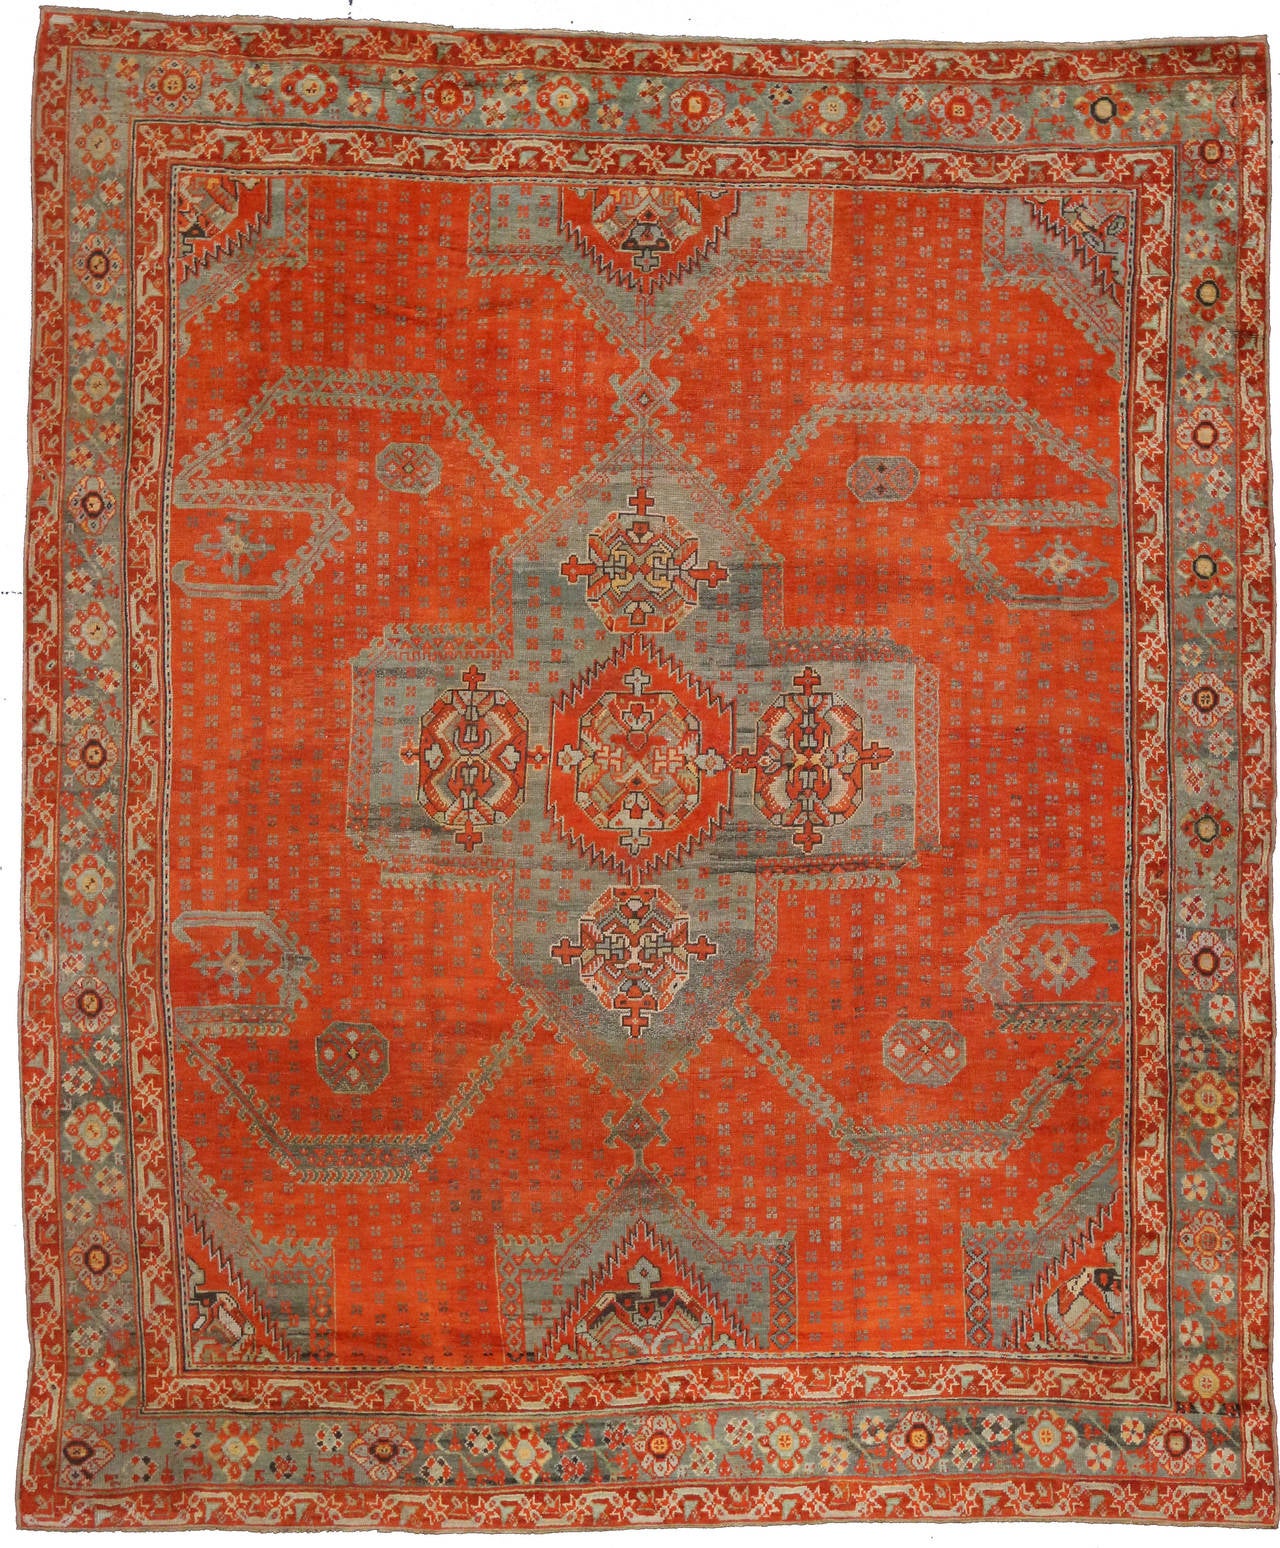 This Mid-Century Modern styled antique Turkish Oushak features a modern center medallion with an overall geometric pattern. The background is a vibrant orange and has a powder blue border and center medallion. Warm up nearly any space with this